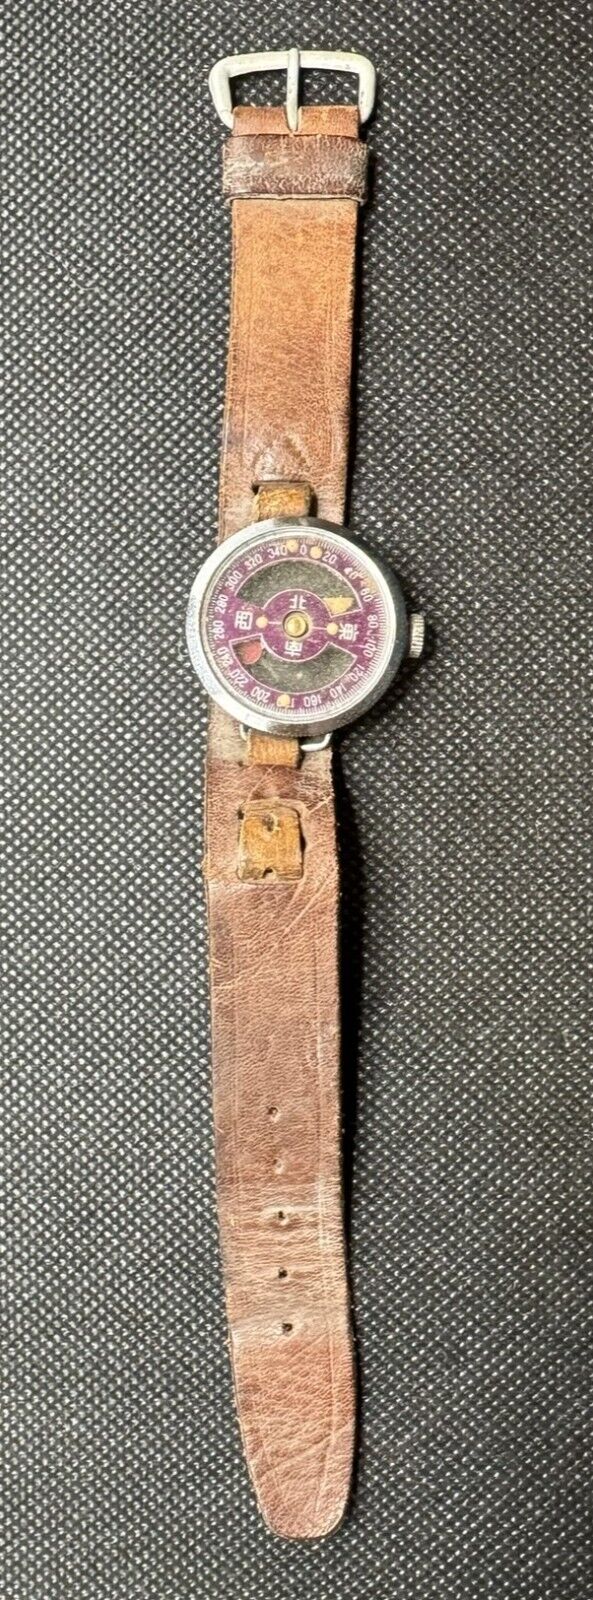 RARE WW2 JAPANESE Pilot's compass brown leather band